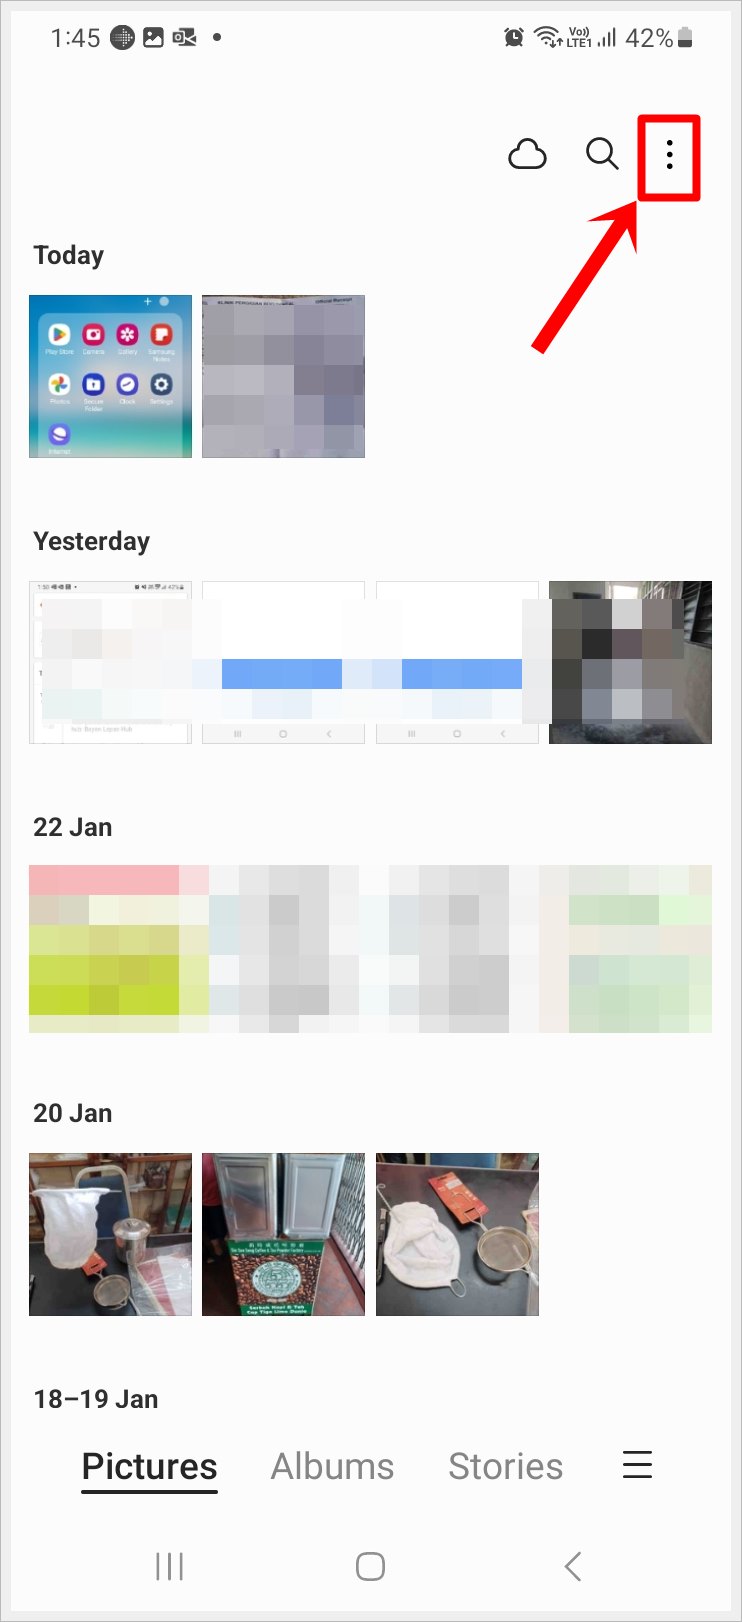 This image shows a screenshot of a Samsung Galaxy phone's 'Gallery' with several saved photos. The 3-Vertical-Dots icon in the top-right is highlighted.